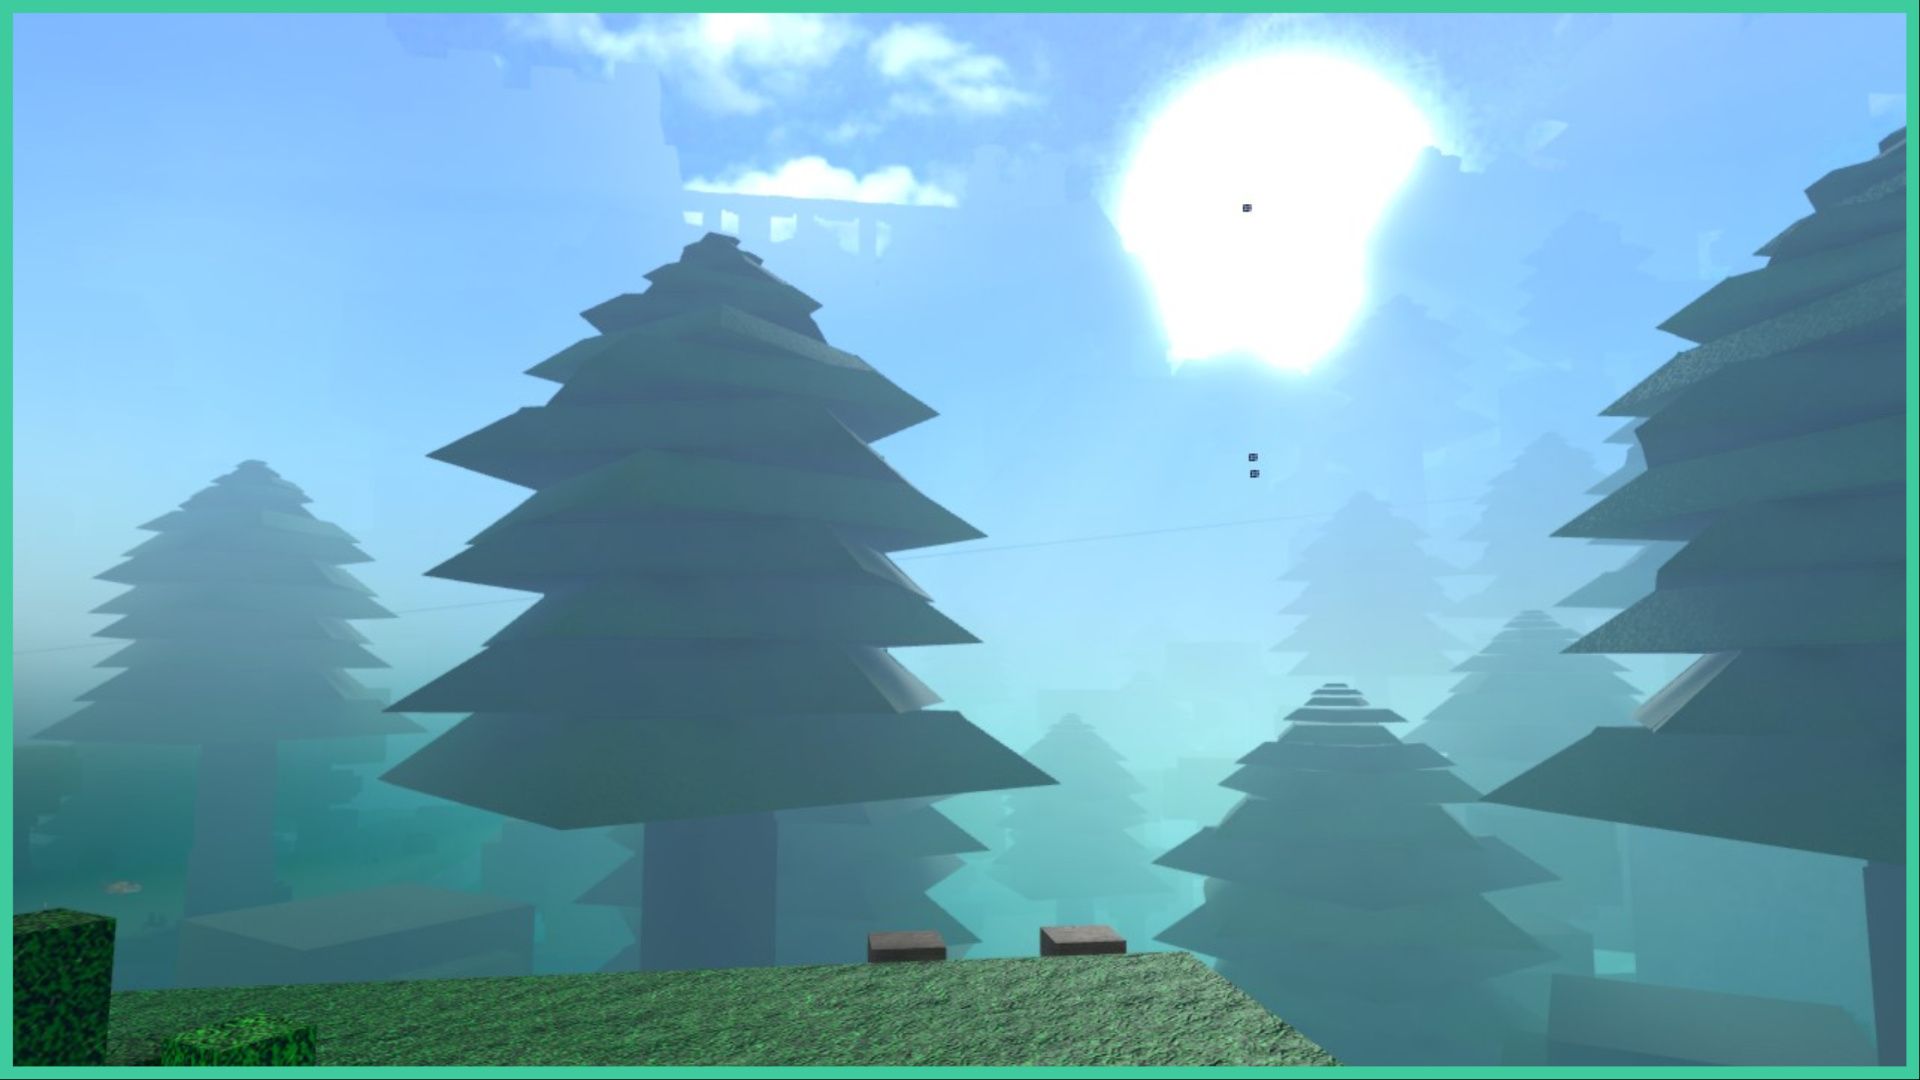 screenshot of the forest of stone in critical revengeance, as the large sun shines over the silhouette of the cliffs, with a faint silhouette of a bridge, in the forefront there are pine trees that stand stall in the forest, with mist gathering around the trunks. From where the player is standing, you can see the top of a ladder that leads down the hill